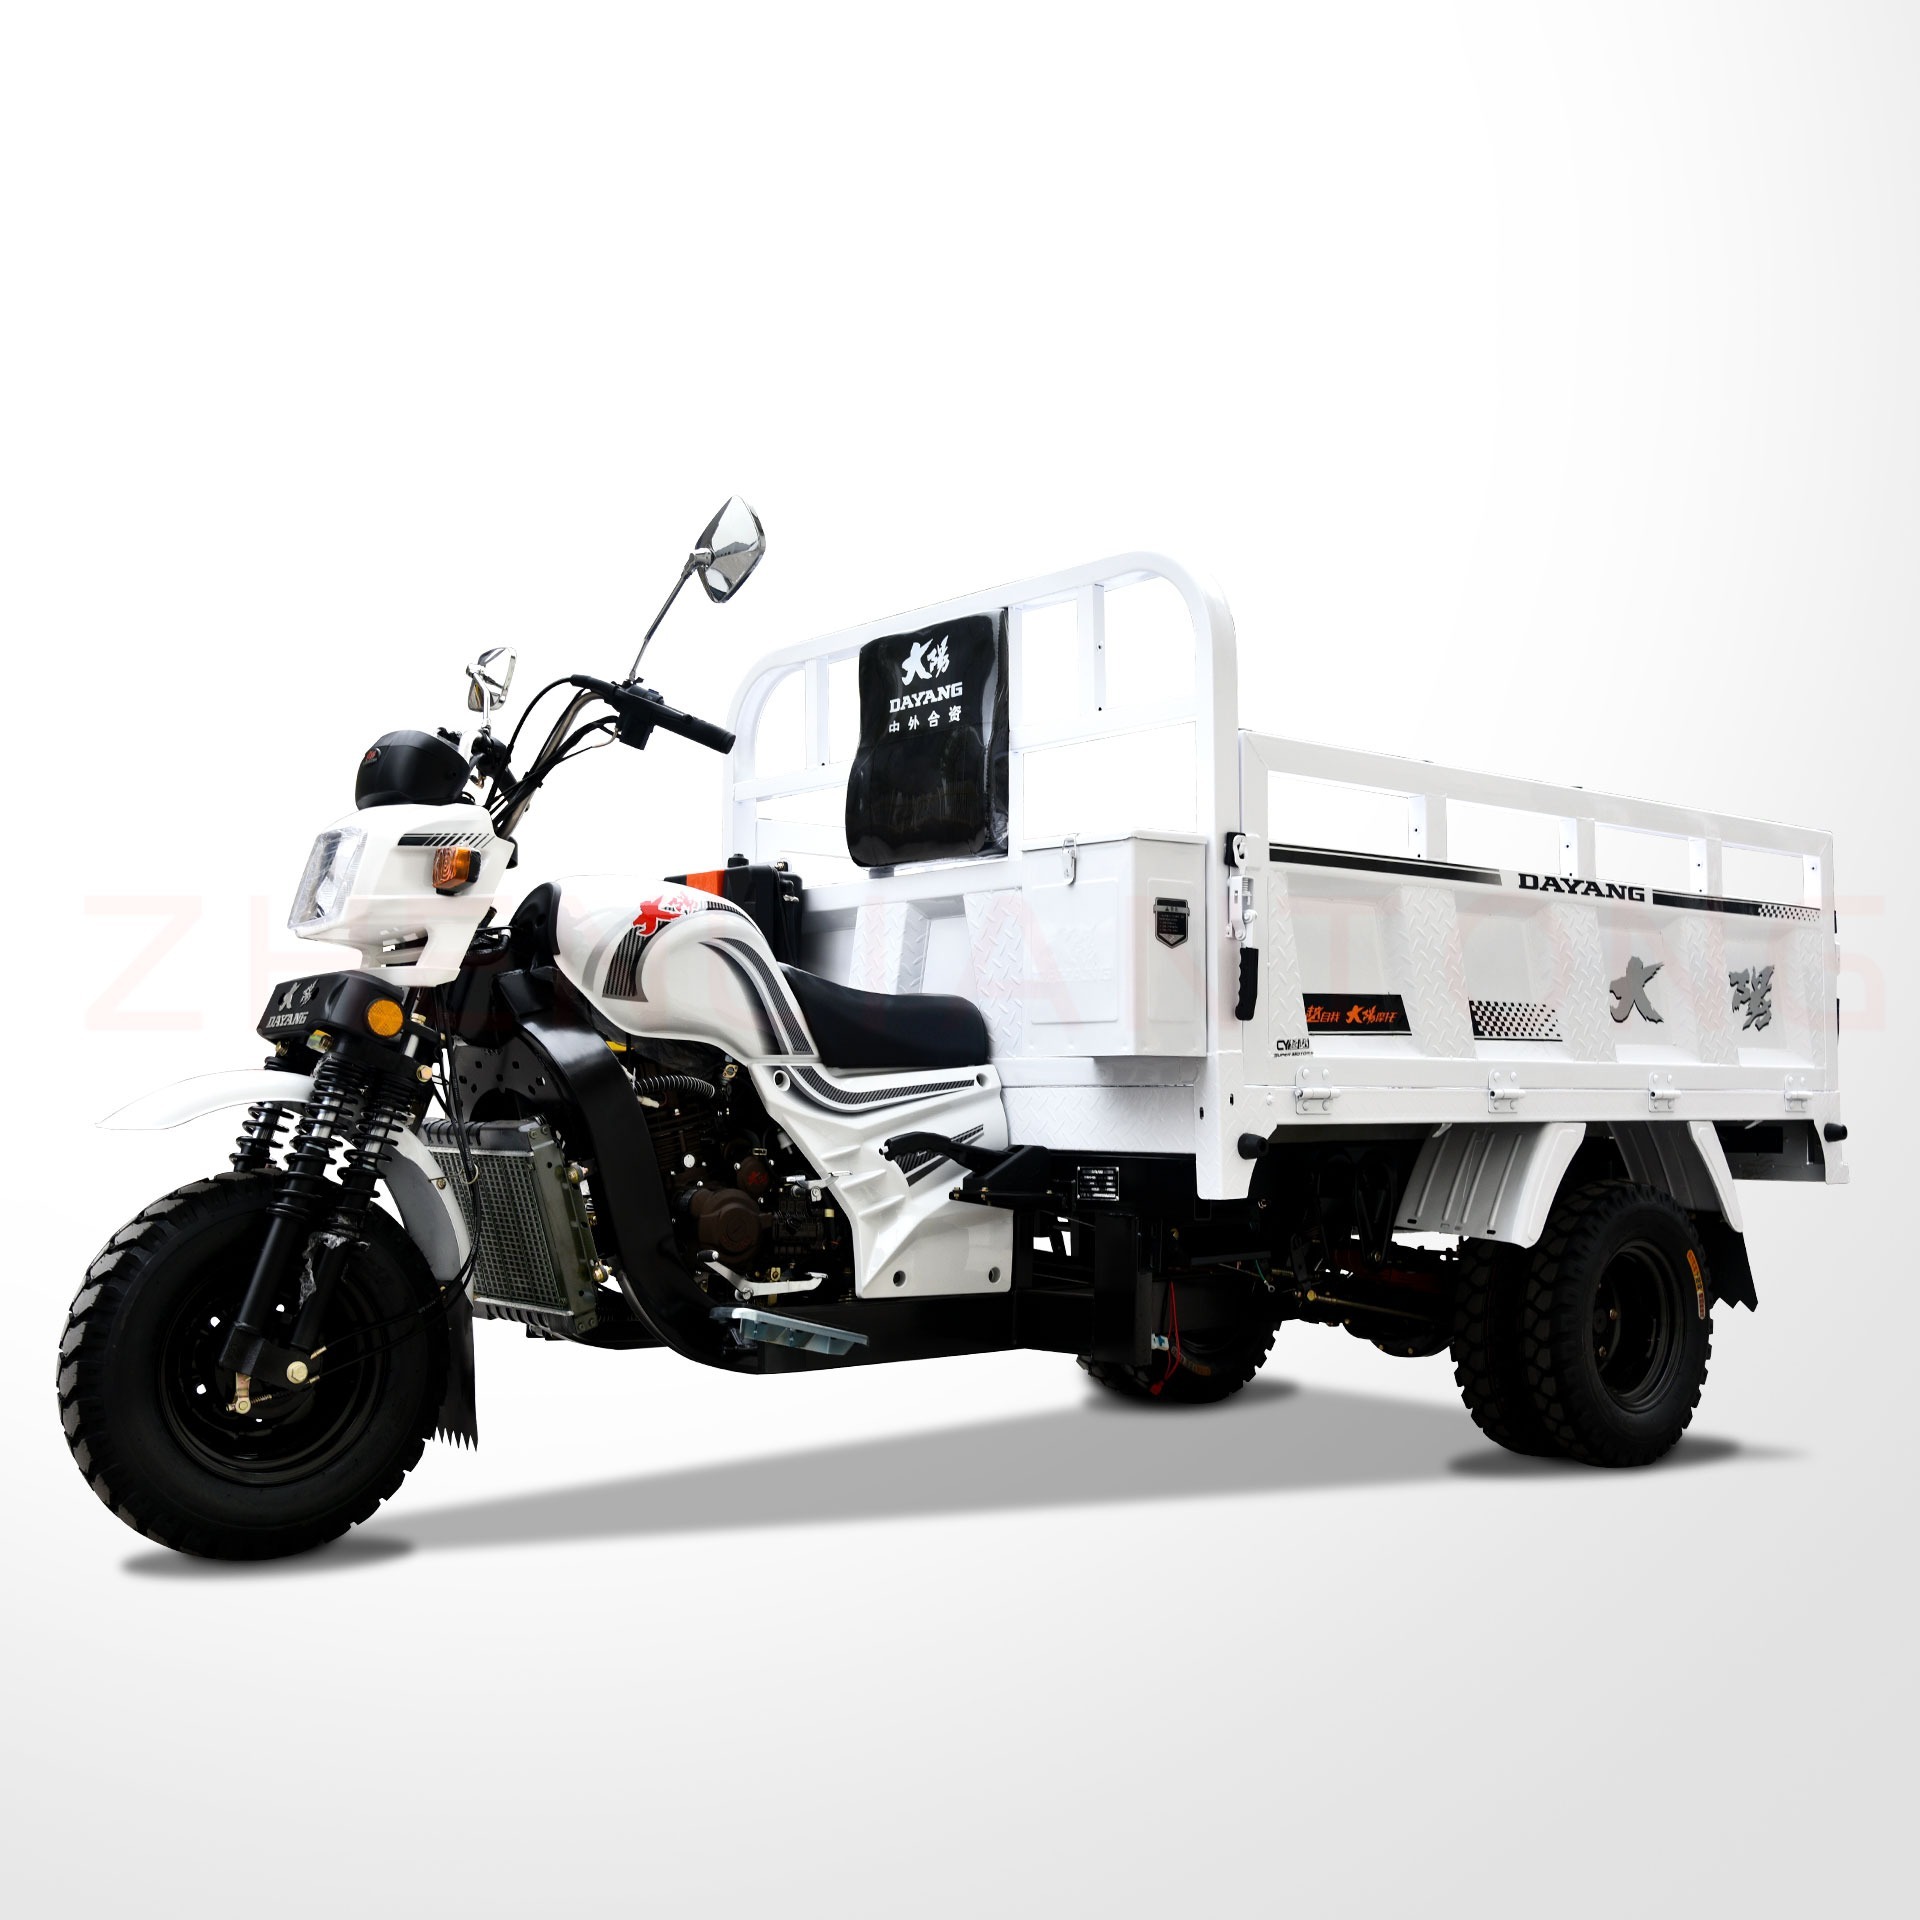 Popular Small Cargo Open Body Type transport tricycle with motor and cargo box price motorized tricycles